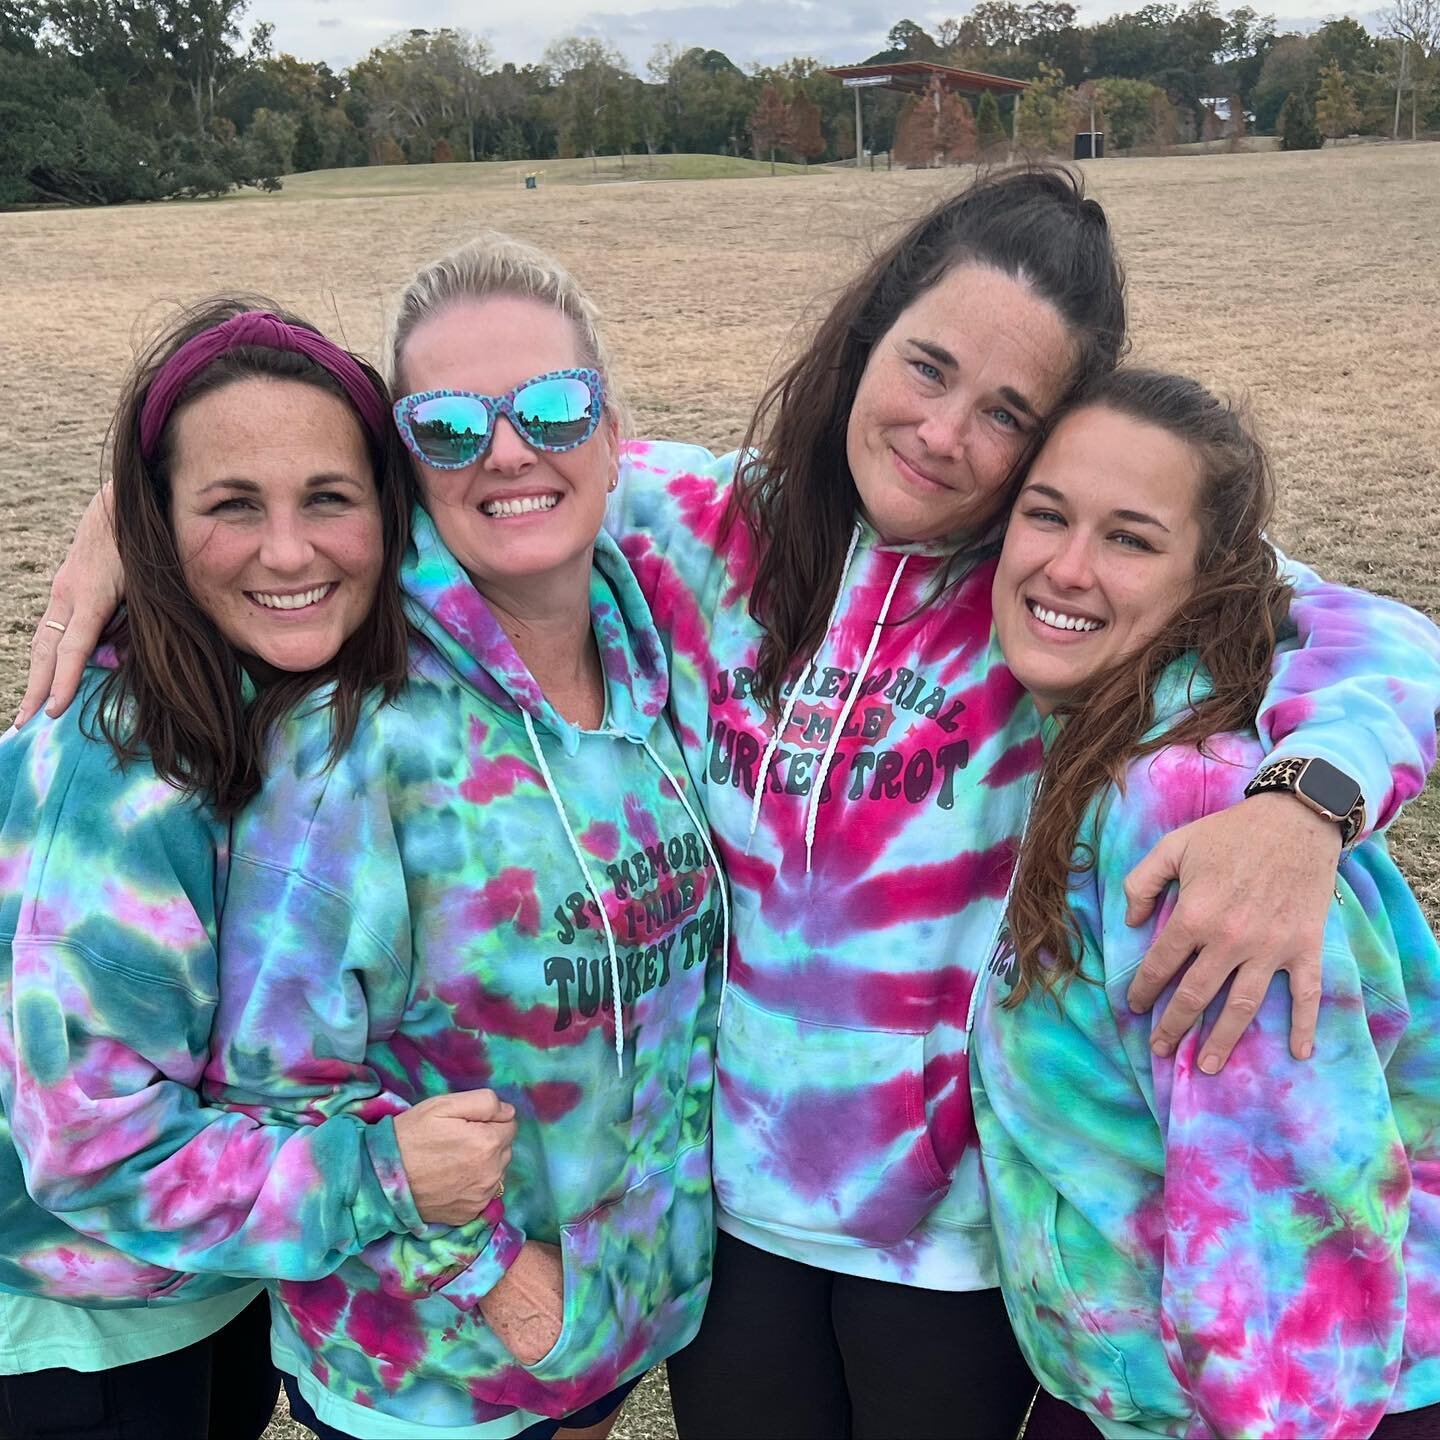 I couldn&rsquo;t have done it without these ladies. Mom. sister. Aunt. One mission to spread love and we did it. We miss you JeanPaul but your legacy will live on forever. No doubt about that. Thank you Lafayette.✌️❤️🦃🏃&zwj;♀️